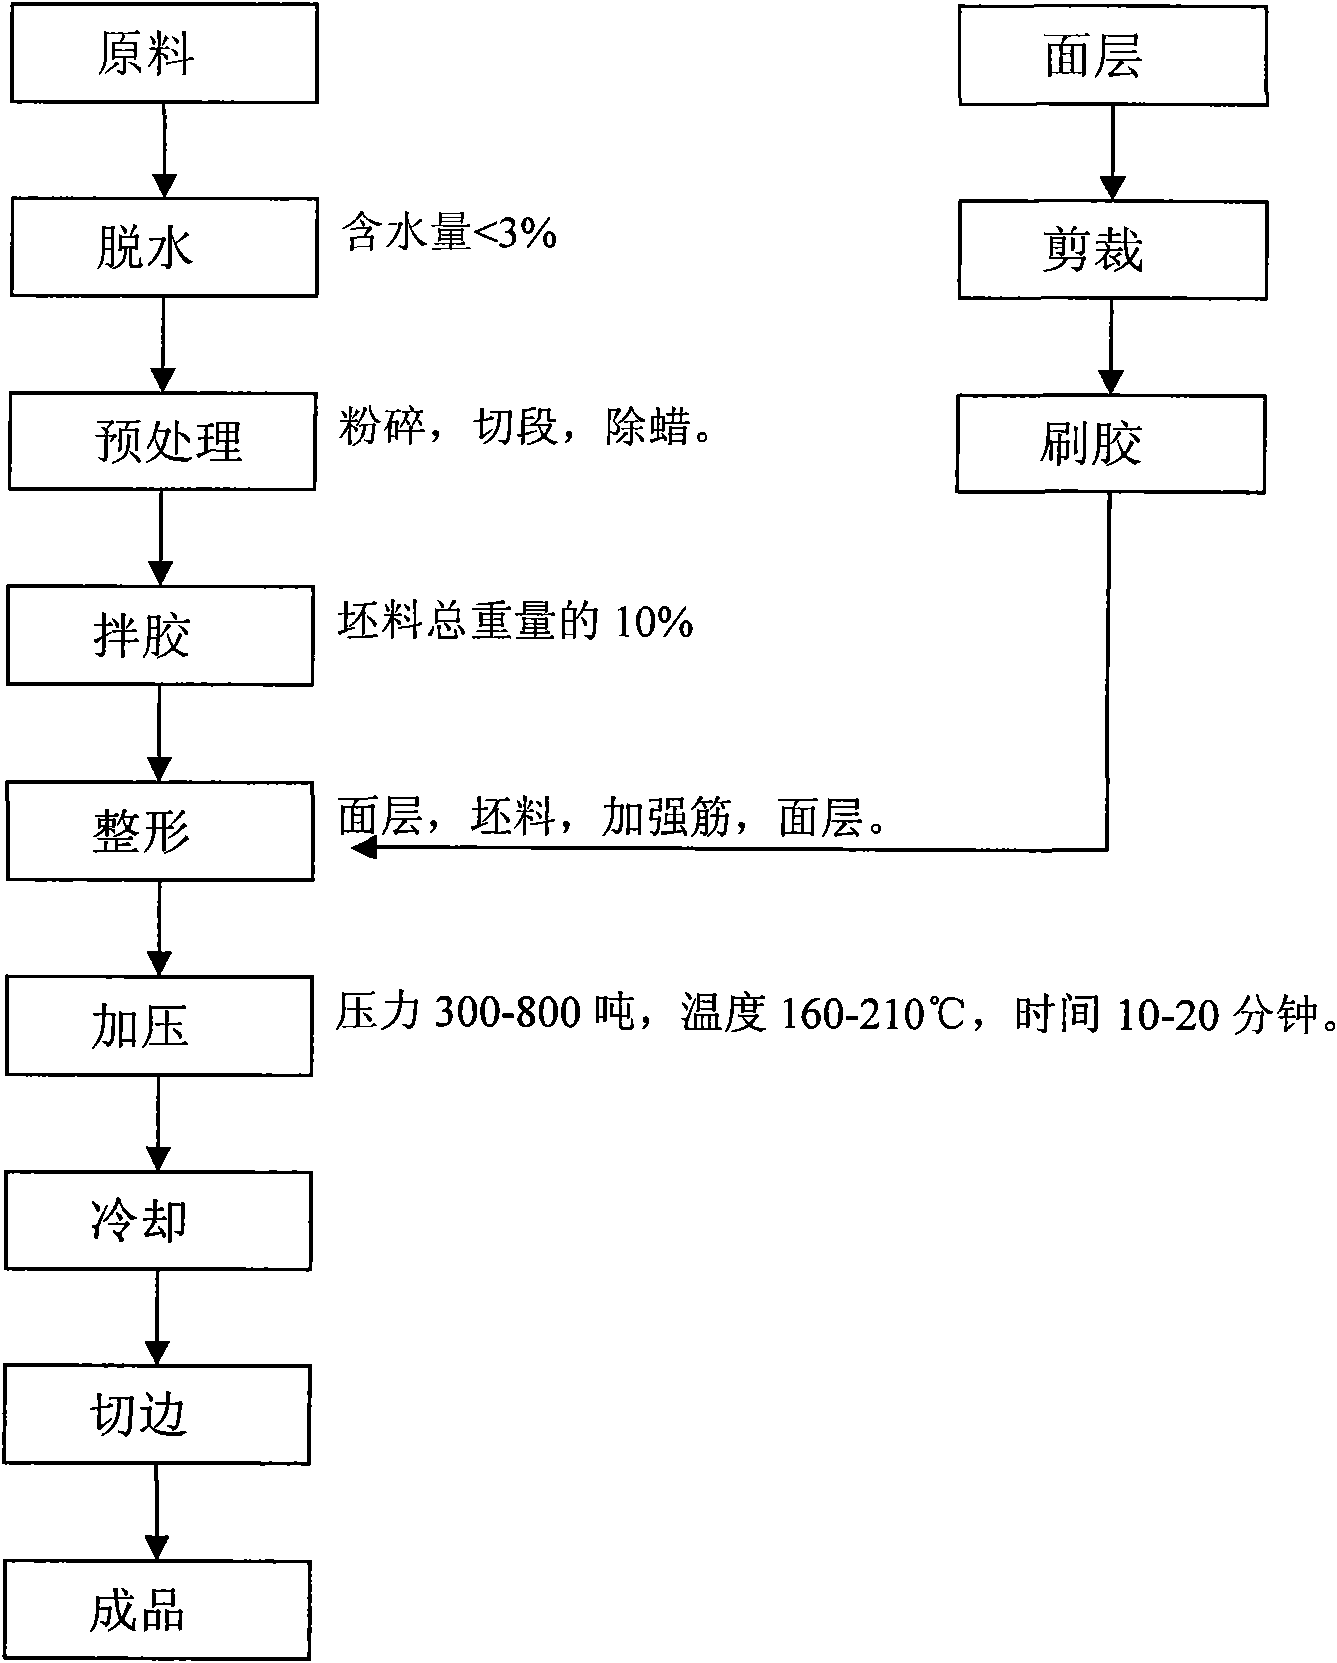 Process for selecting, using and producing cotton straw composite board raw materials